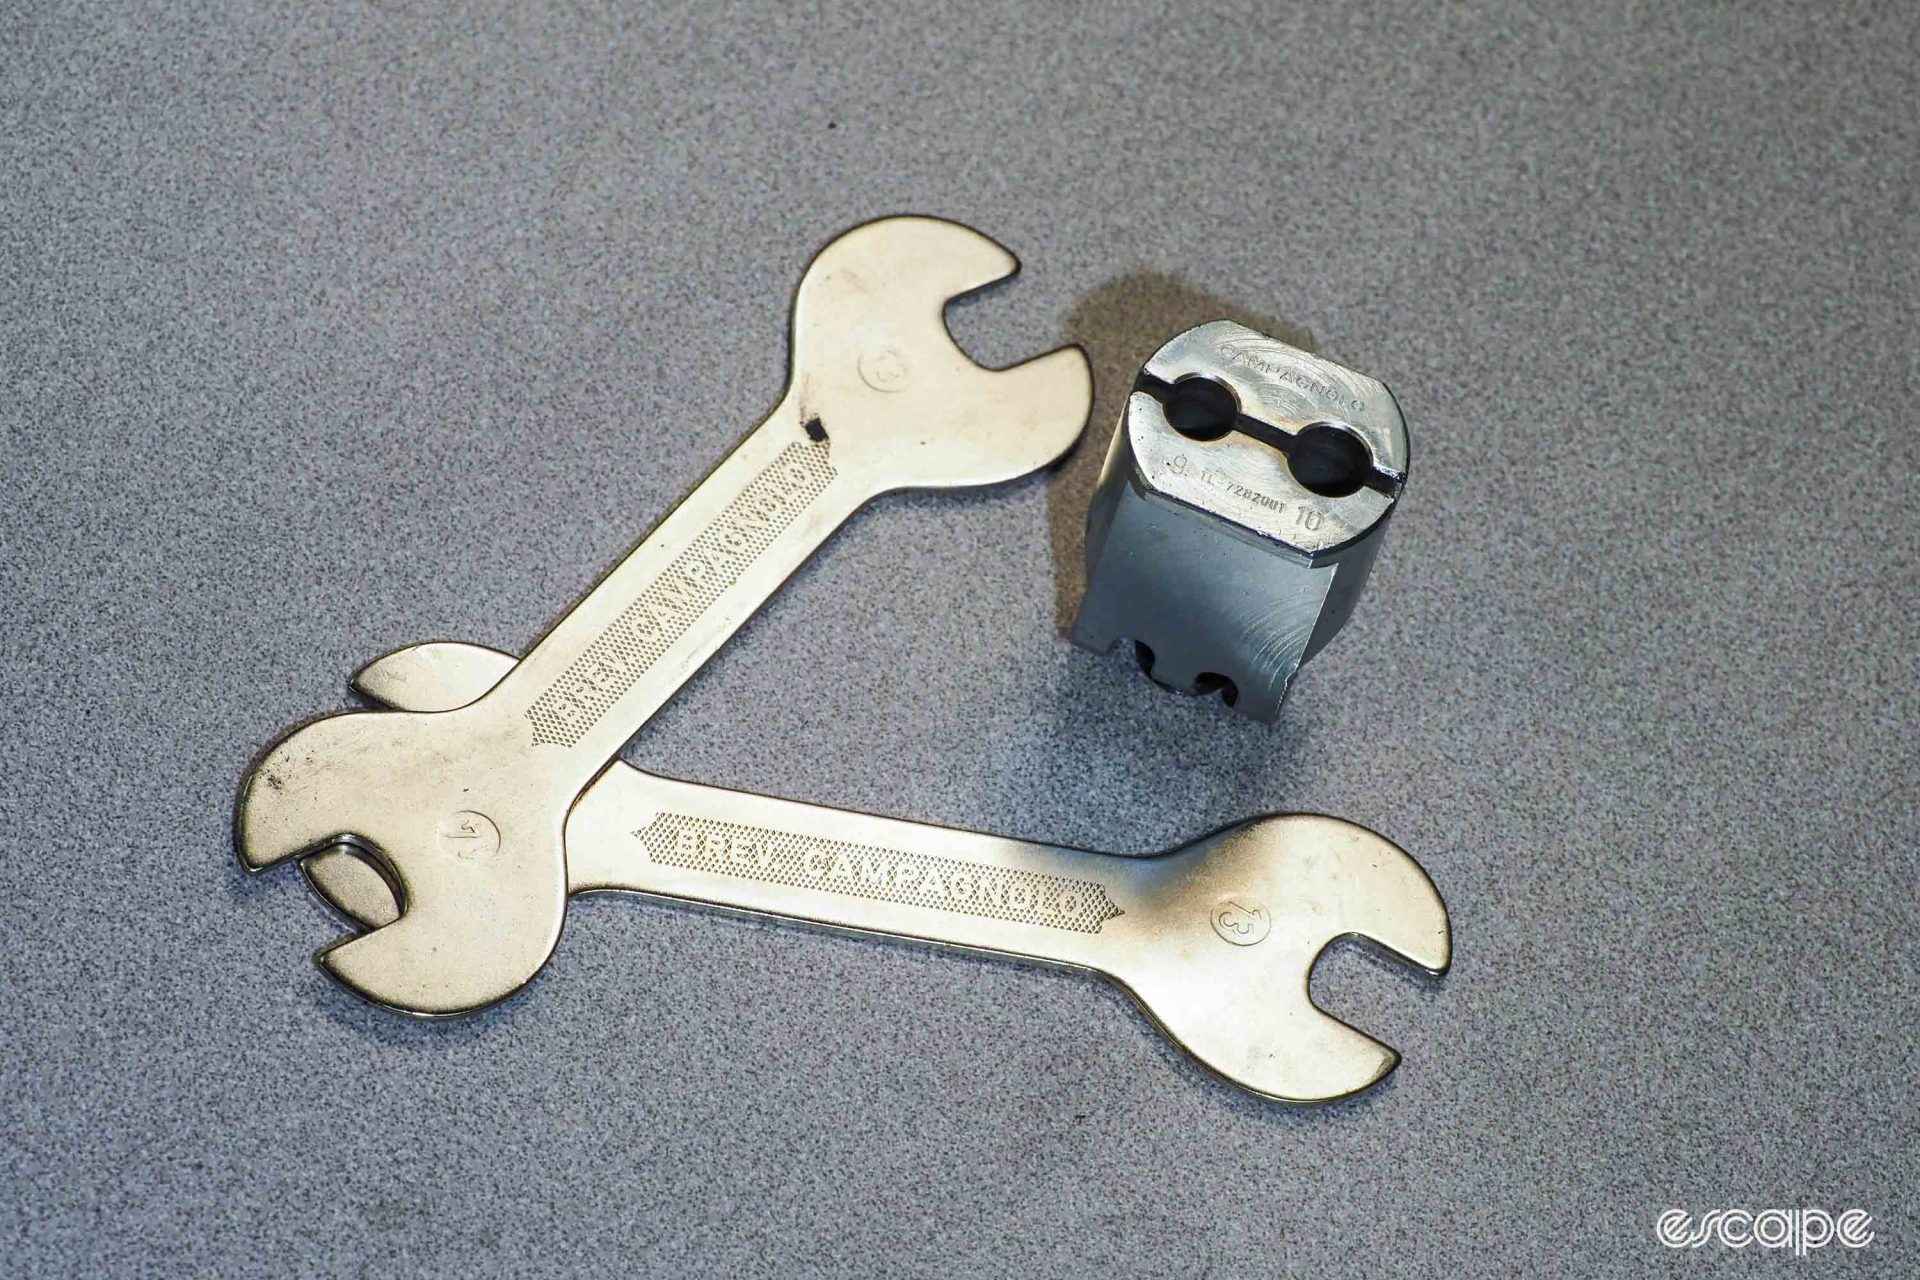 Campagnolo tool kit axle vise and cone wrenches